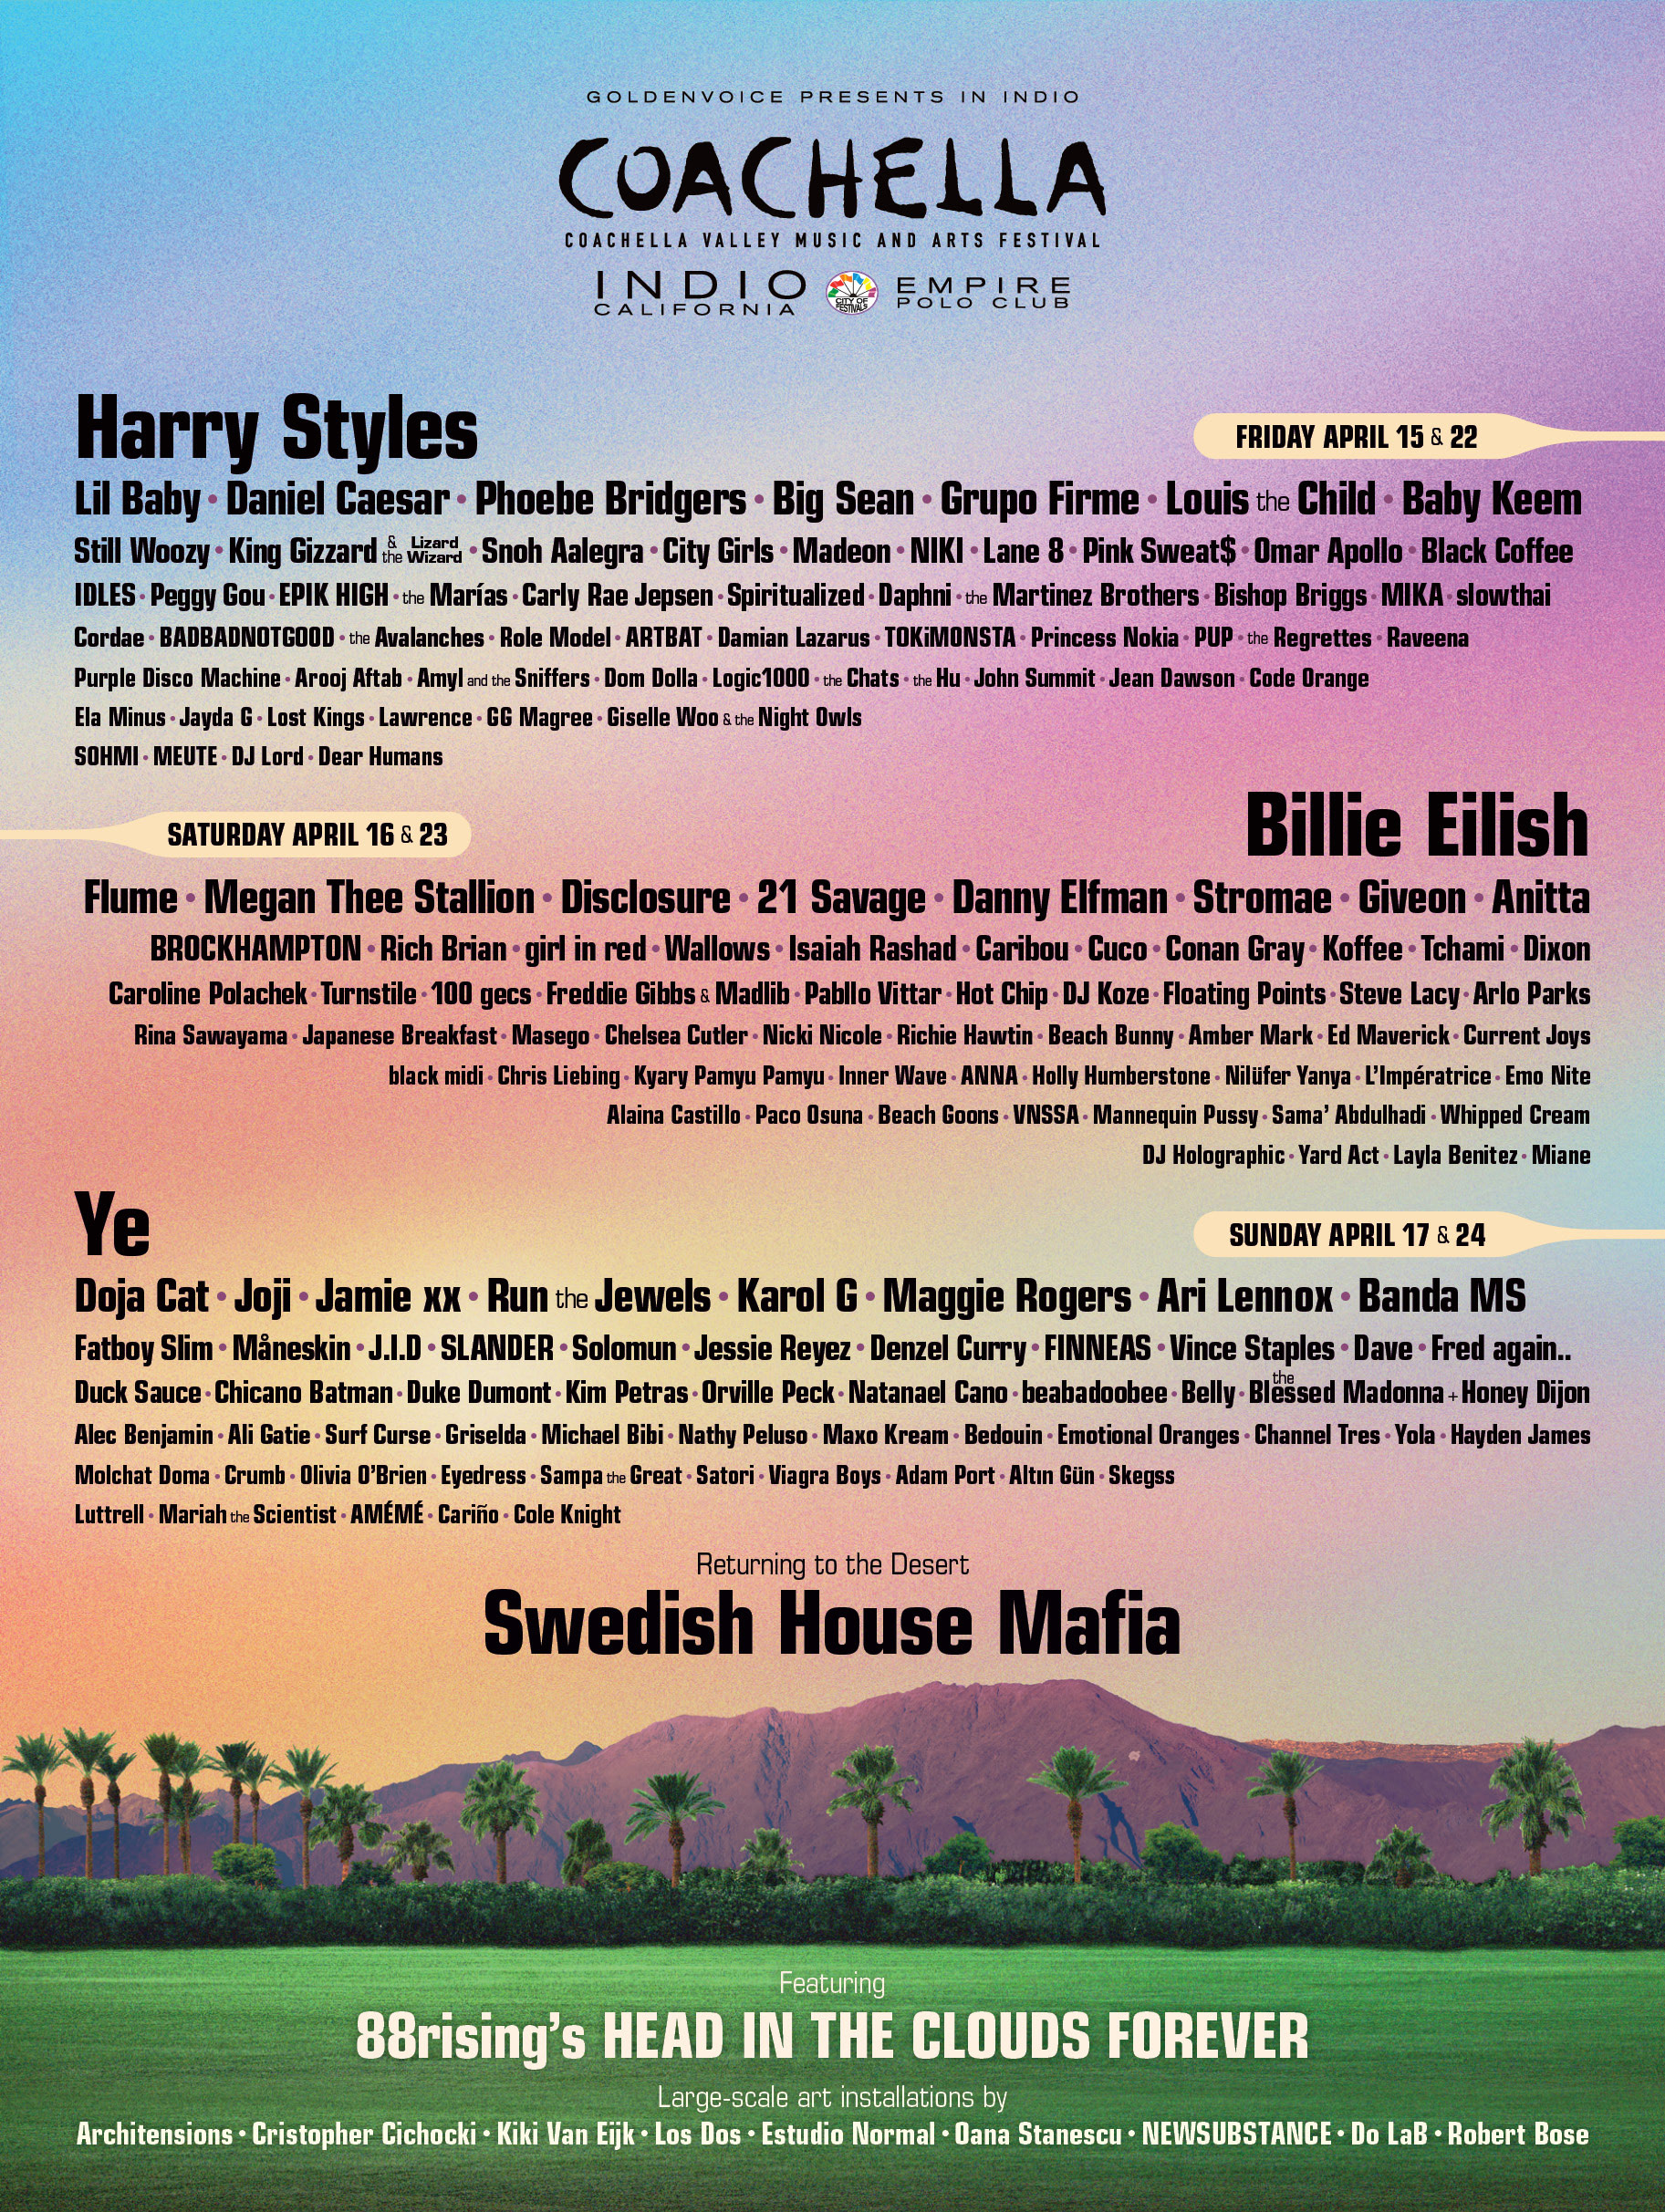 Kanye West out at Coachella 2022 10 artists who could headline in his